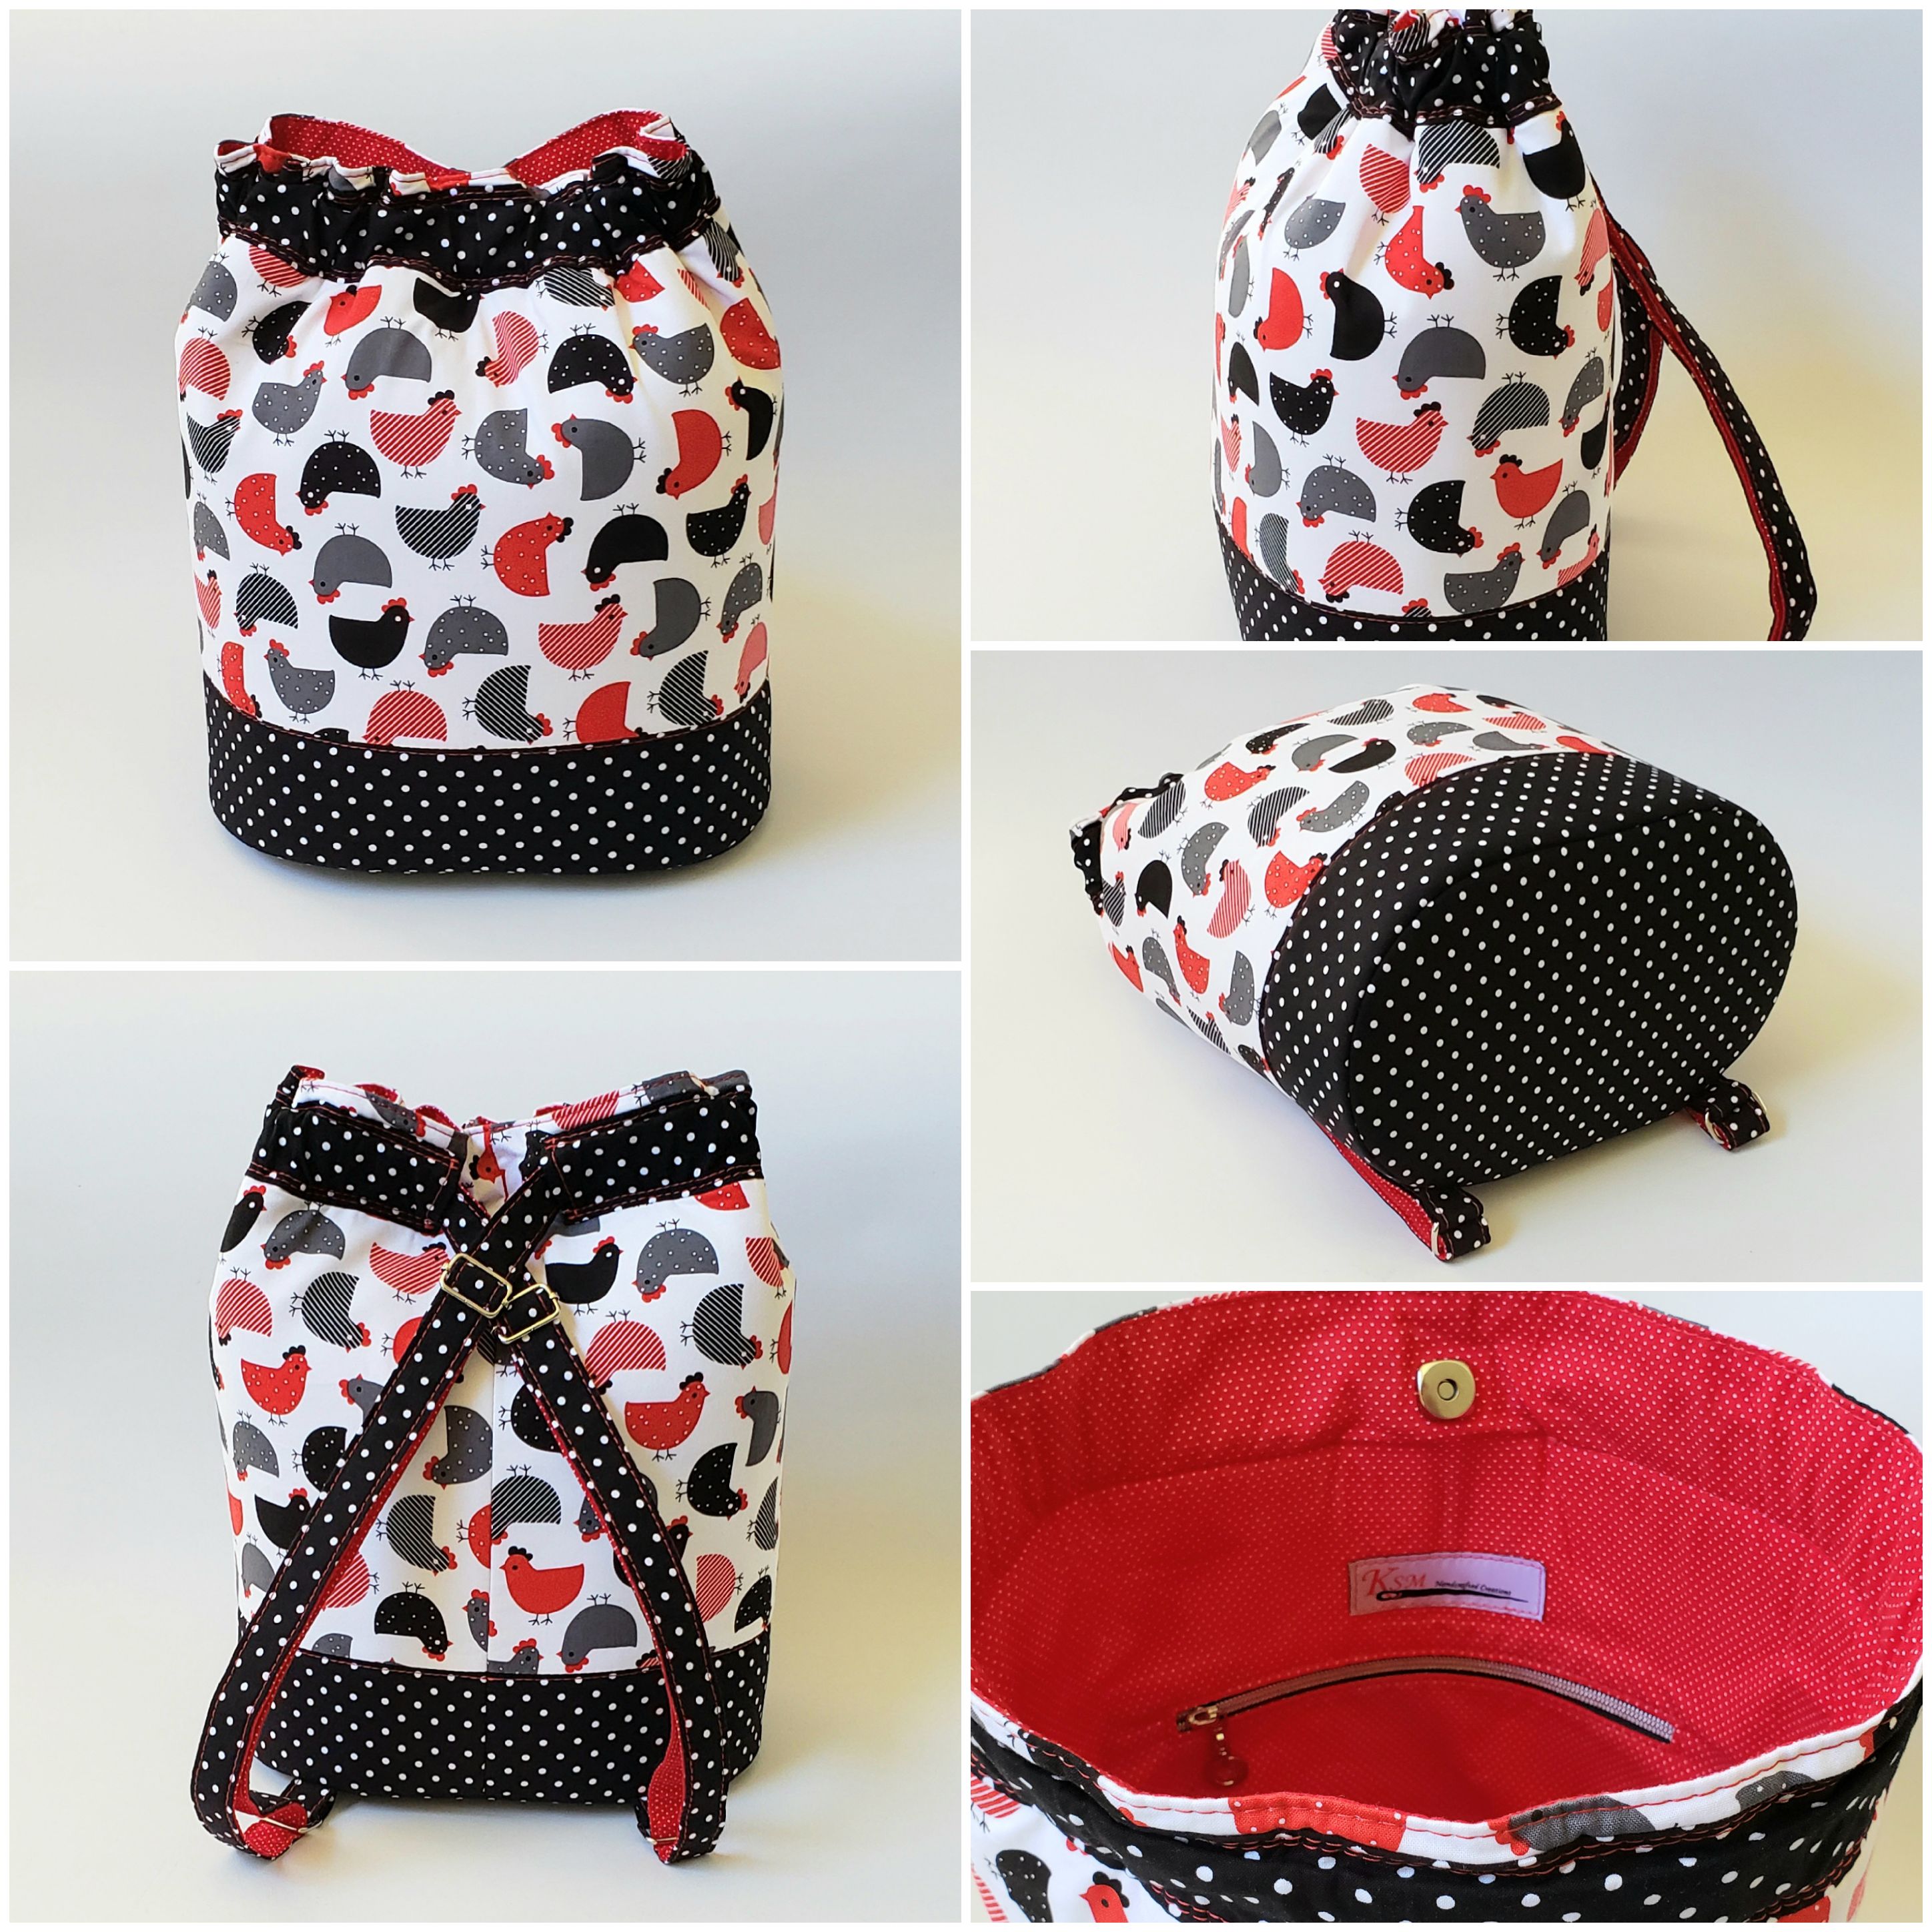 The Duffel Backpack made by Susan of KSM Creations